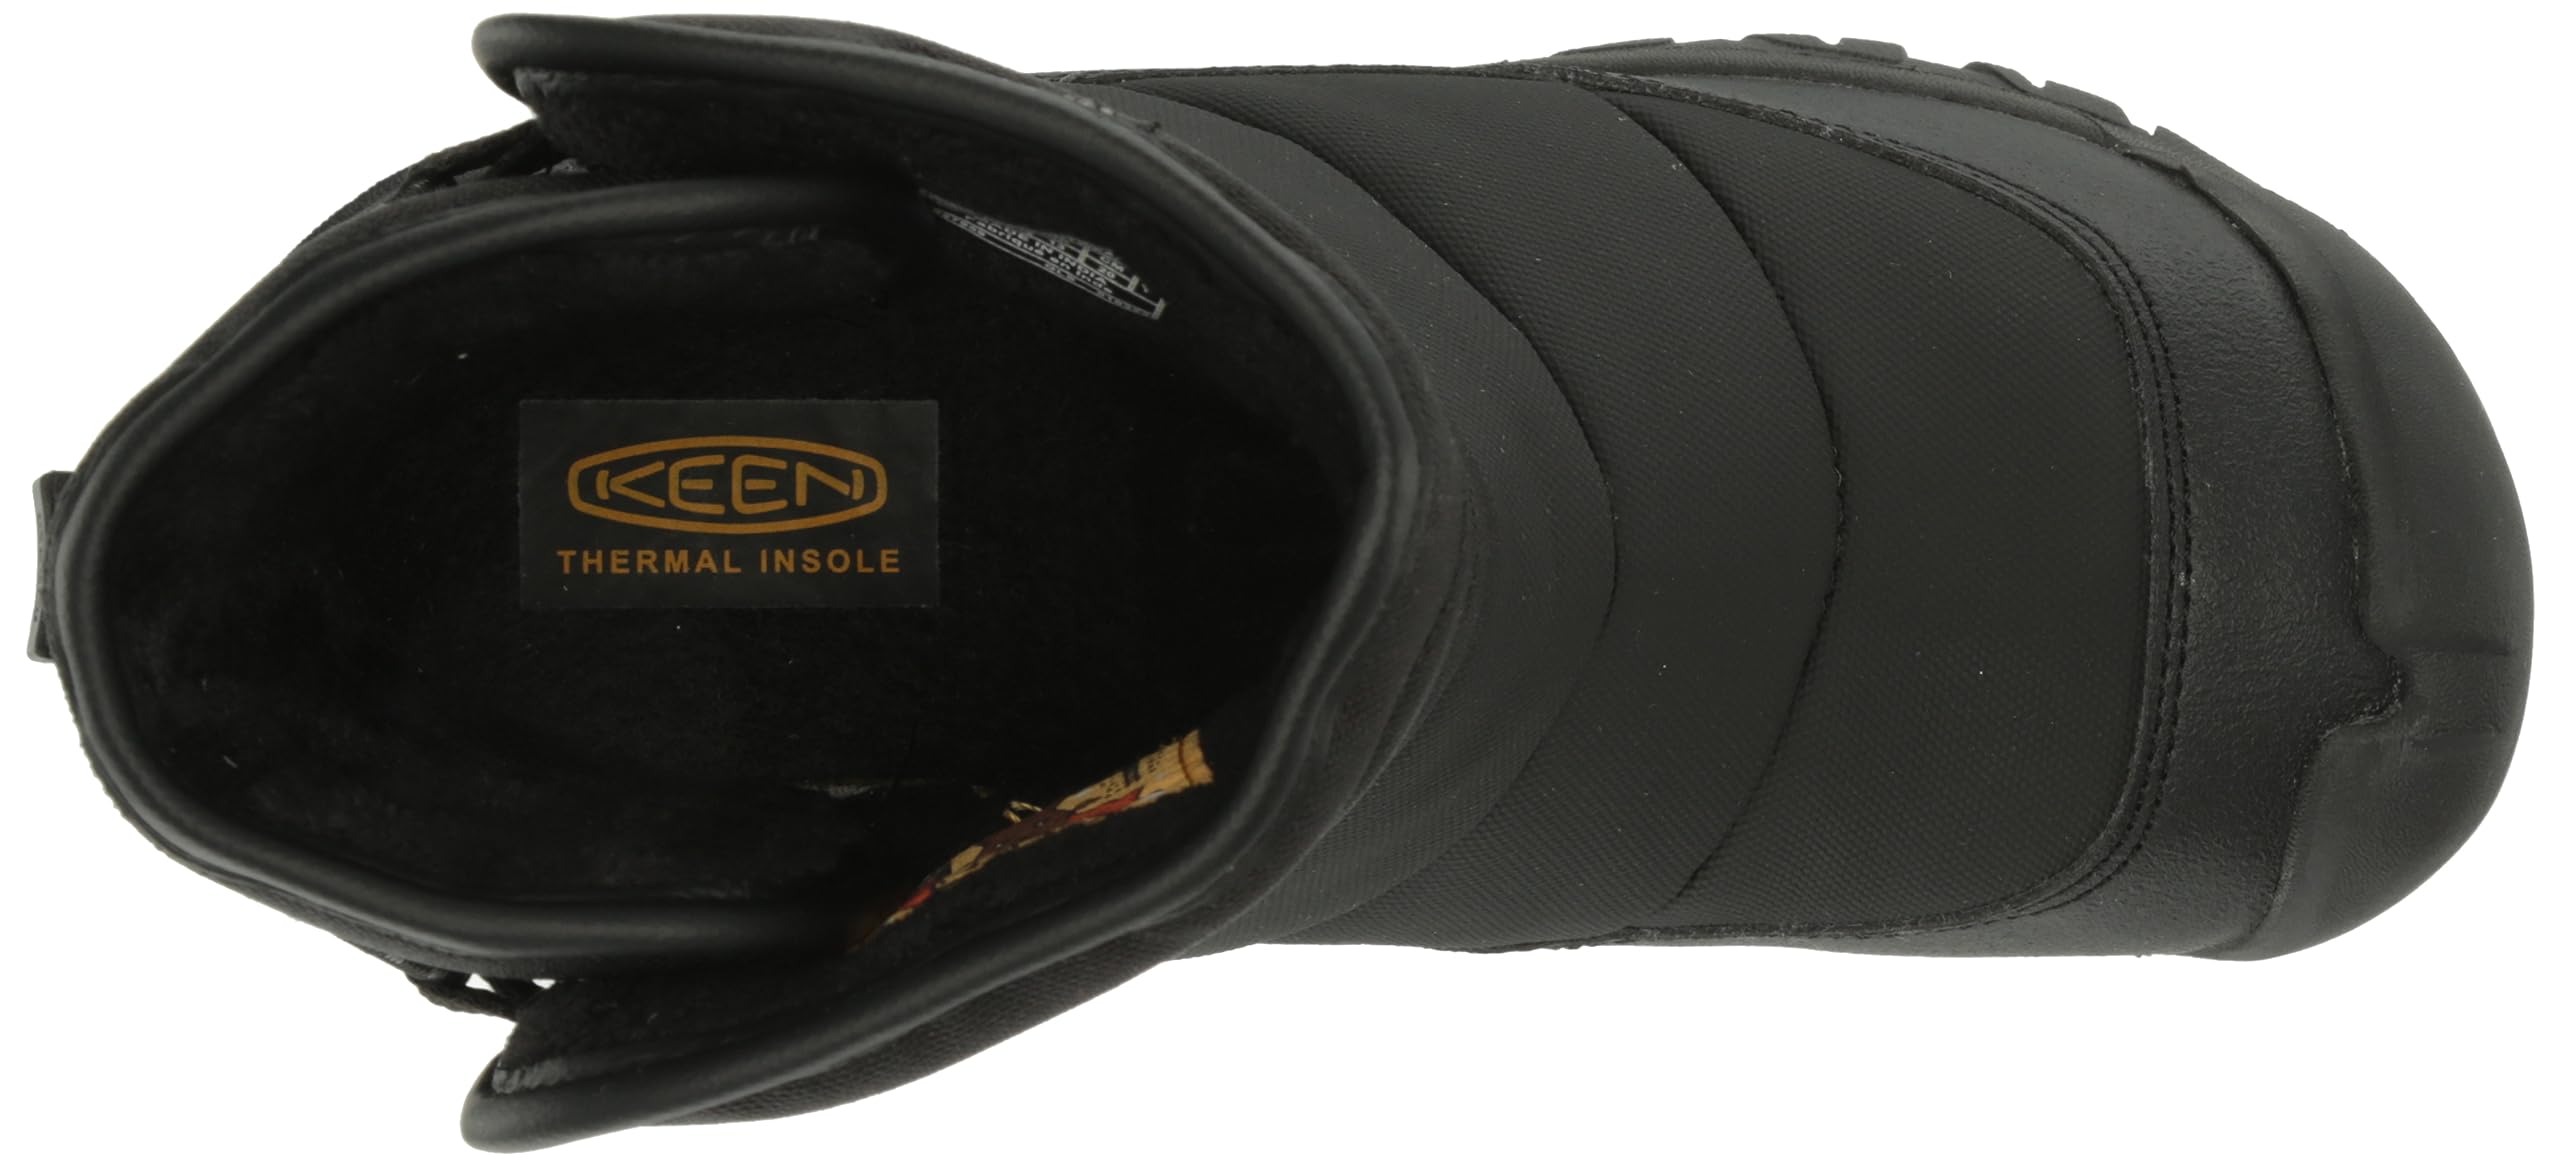 KEEN Unisex-Child Puffrider Insulated Waterproof Durable Easy on Snow Boots